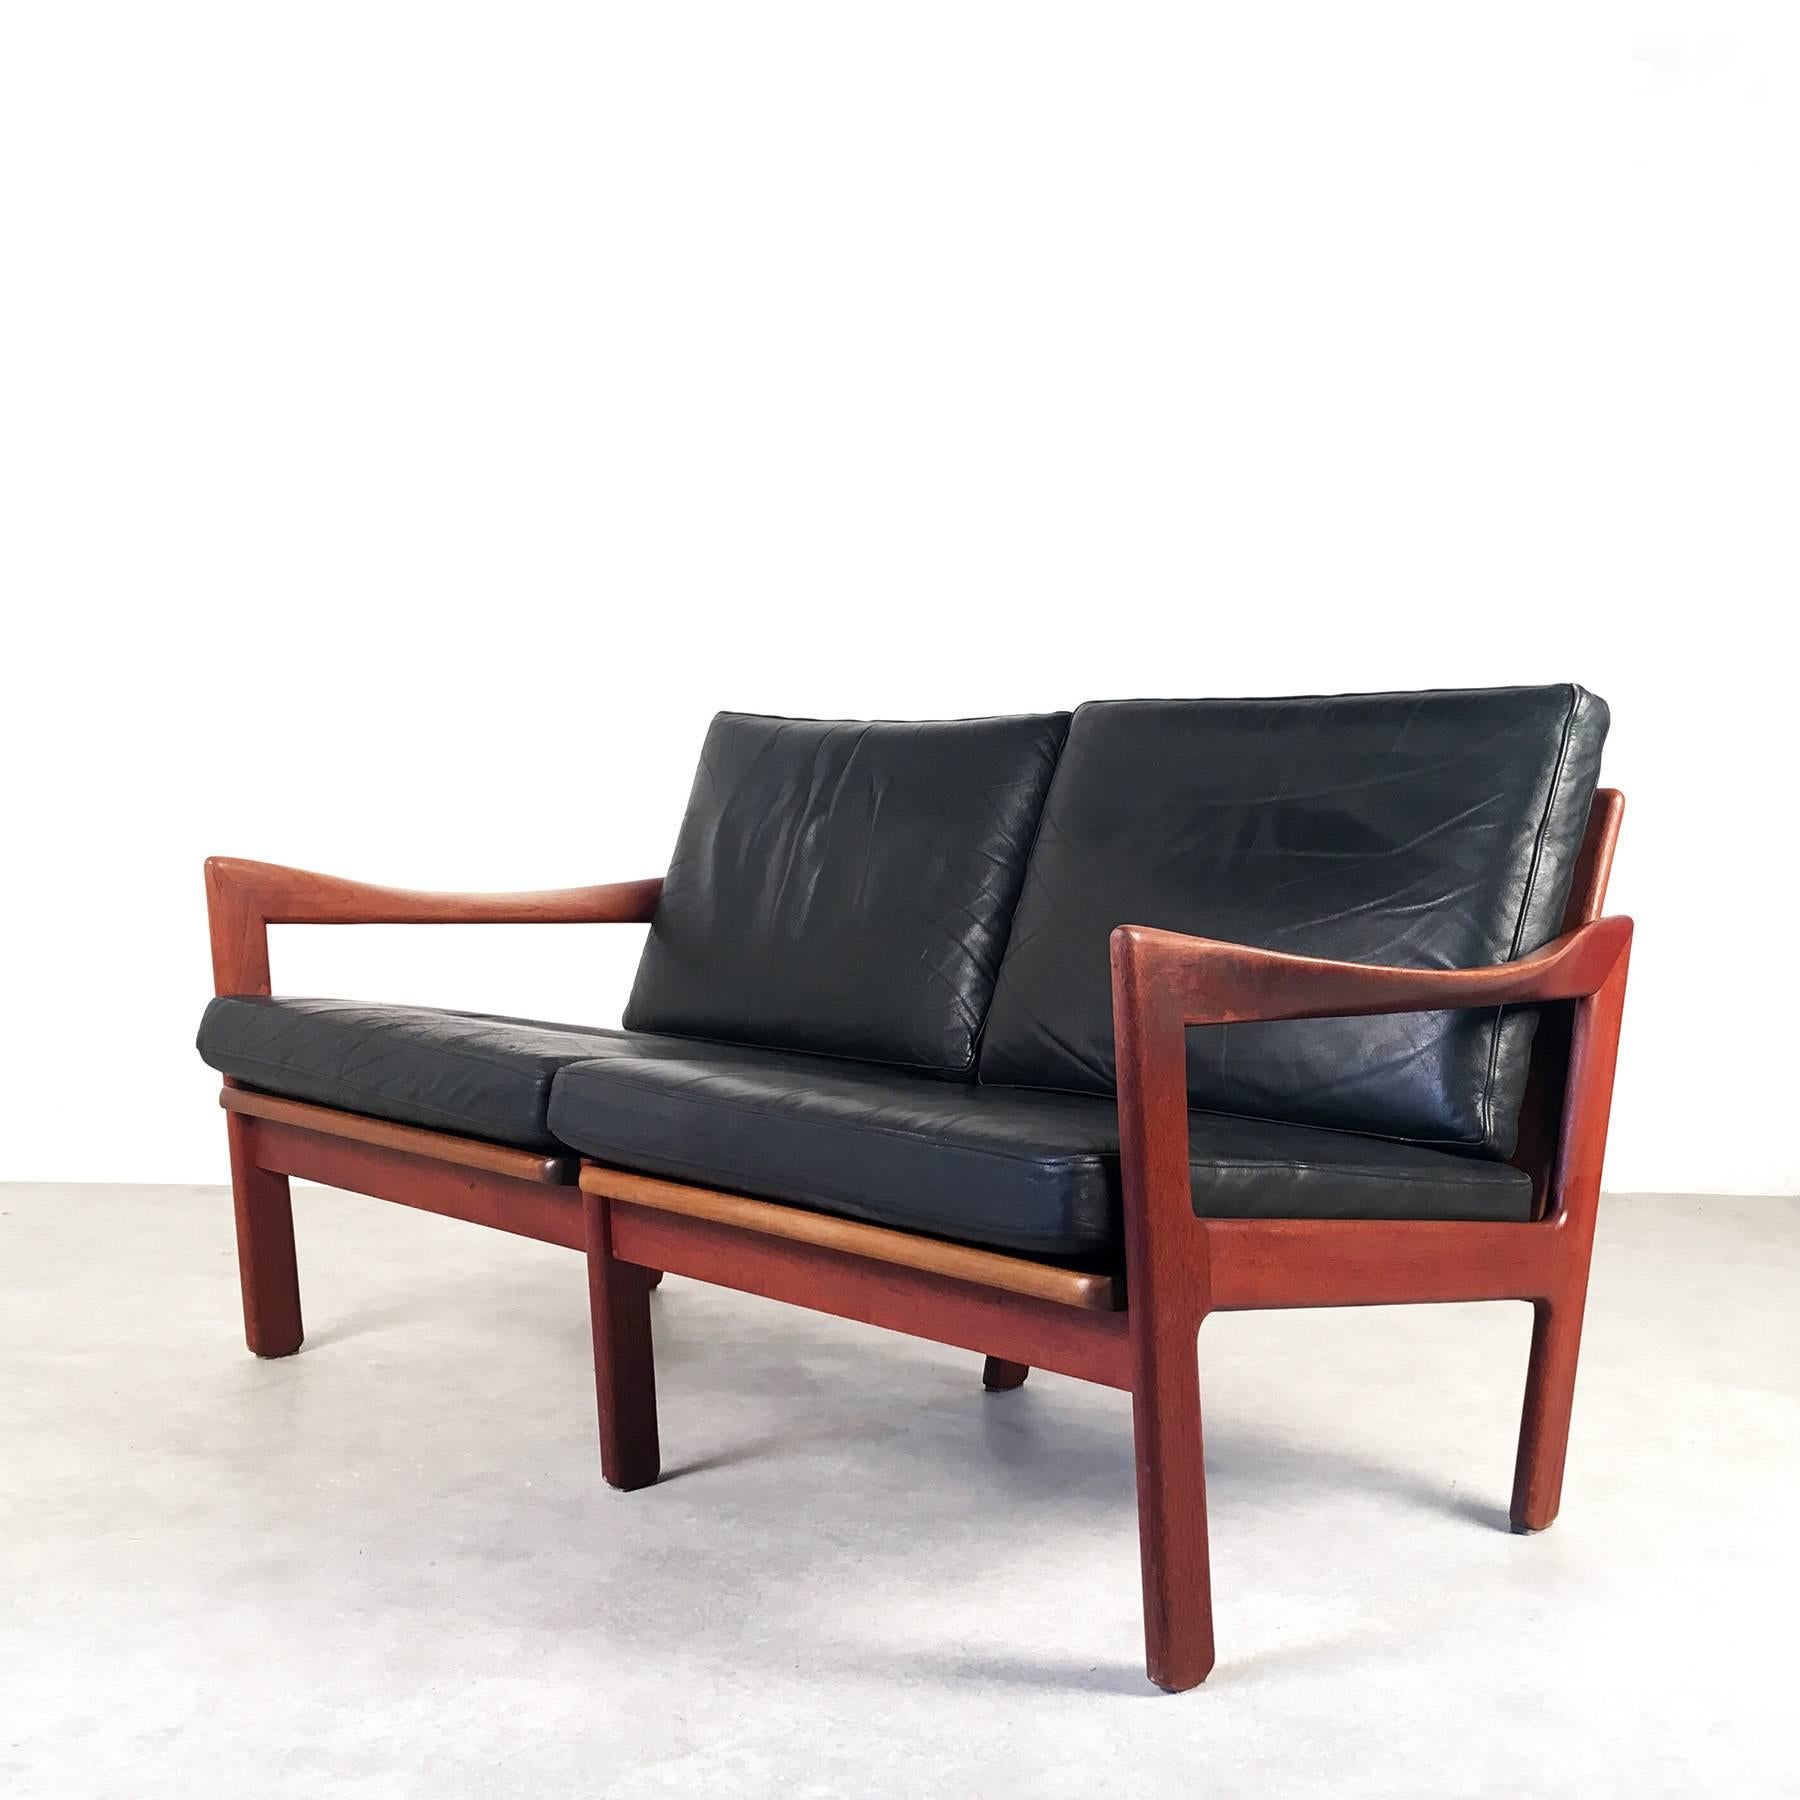 Mid-20th Century Danish Two-Seat Sofa by Illum Wikkelso for Eilersen For Sale